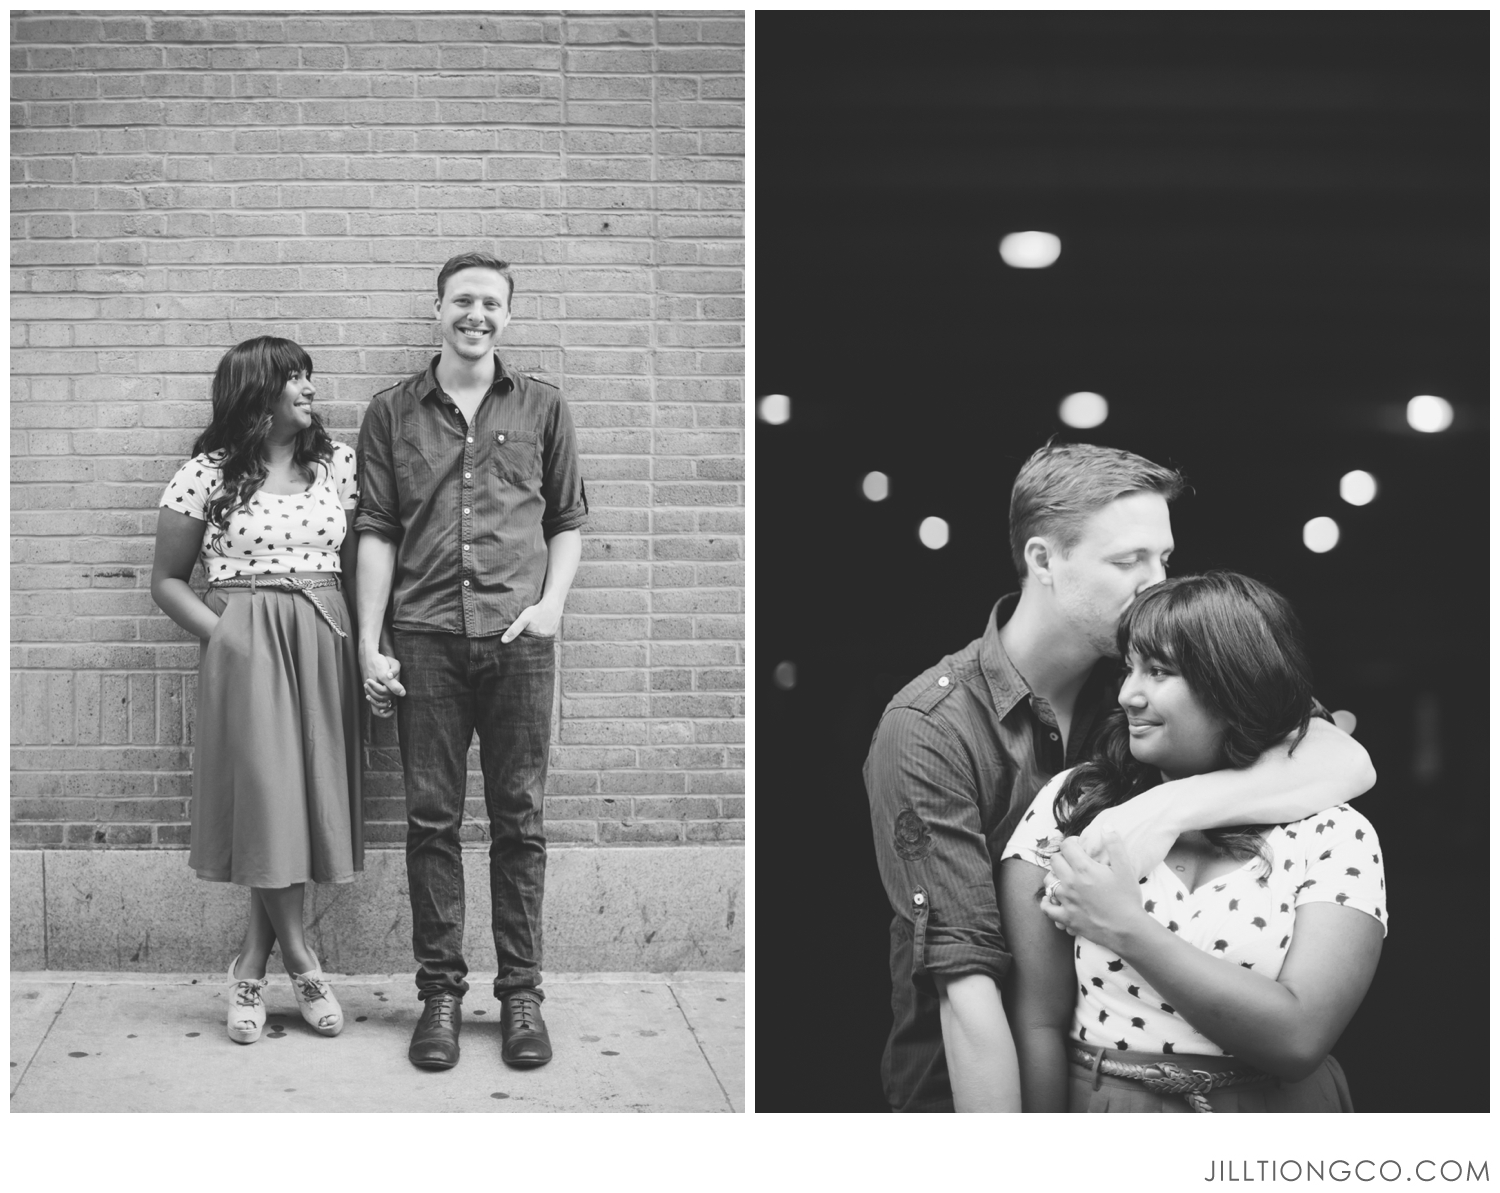 Chicago River, Chicago Loop Engagement Photos | Chicago Engagement Photos | Chicago Engagement Photos Location Ideas | Jill Tiongco Photography